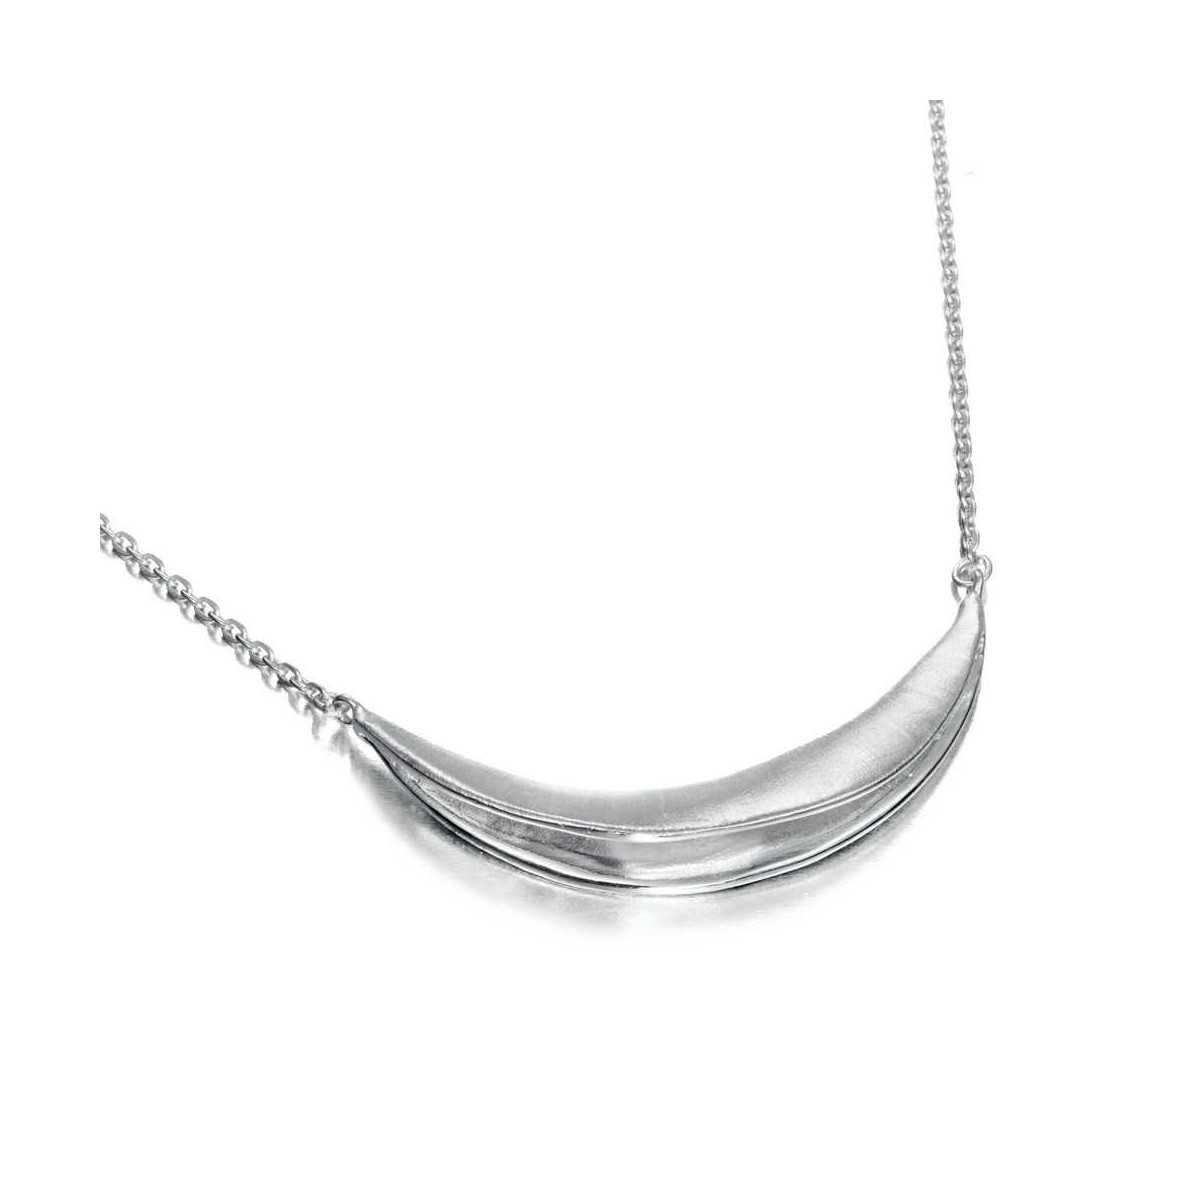 ODYSSEY Necklace  in Silver.